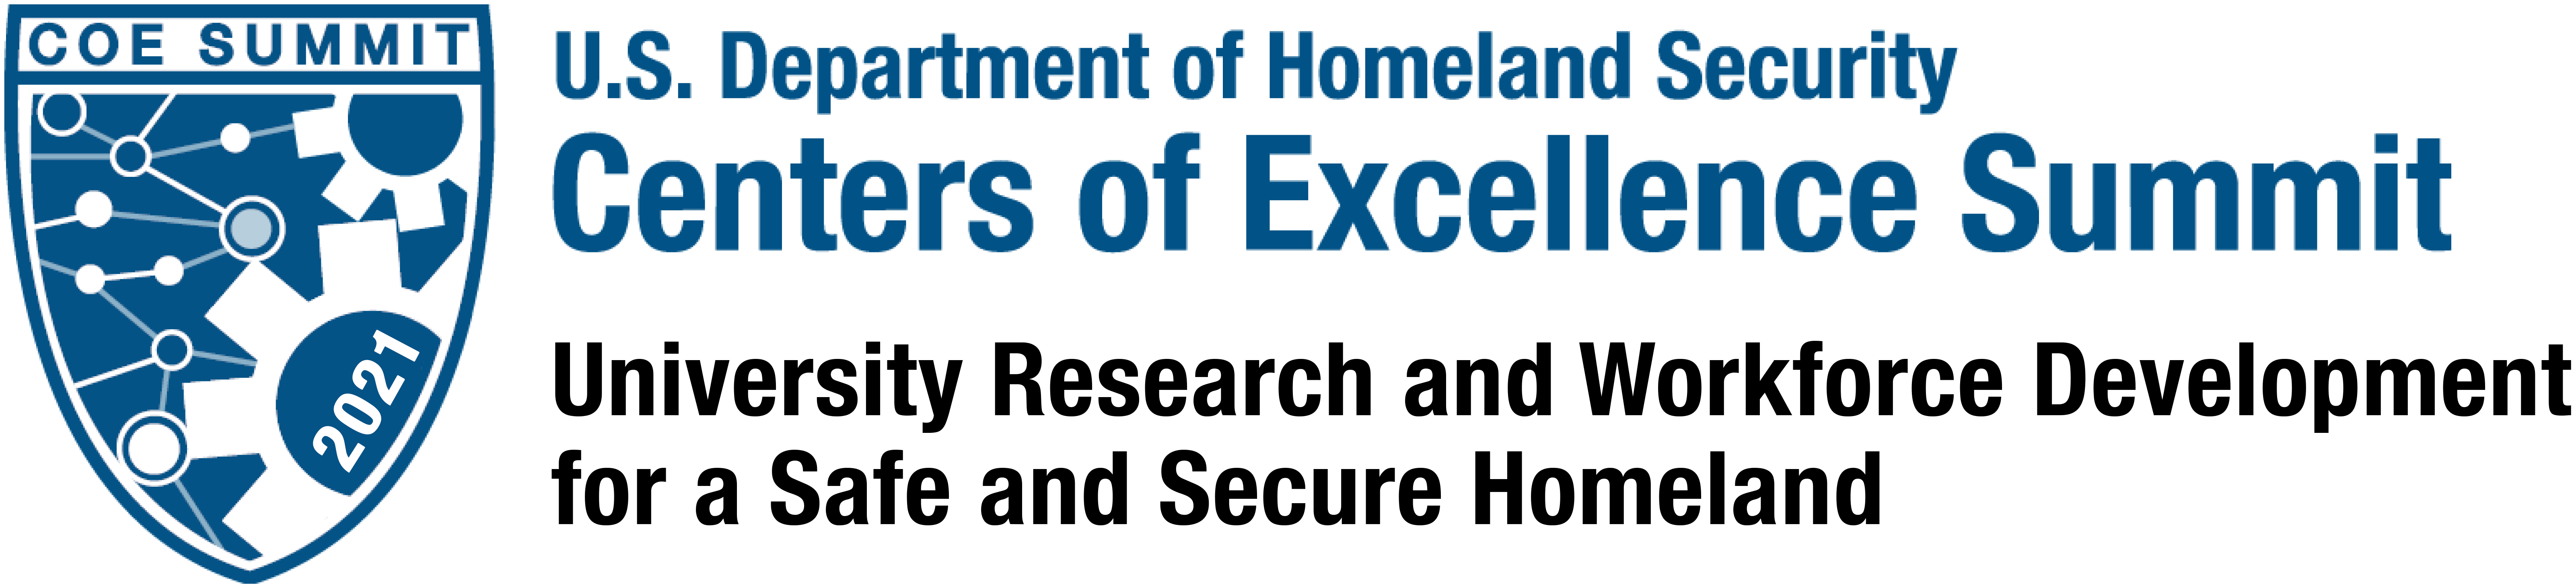 Department of Homeland Security Centers of Excellence Summit 2021